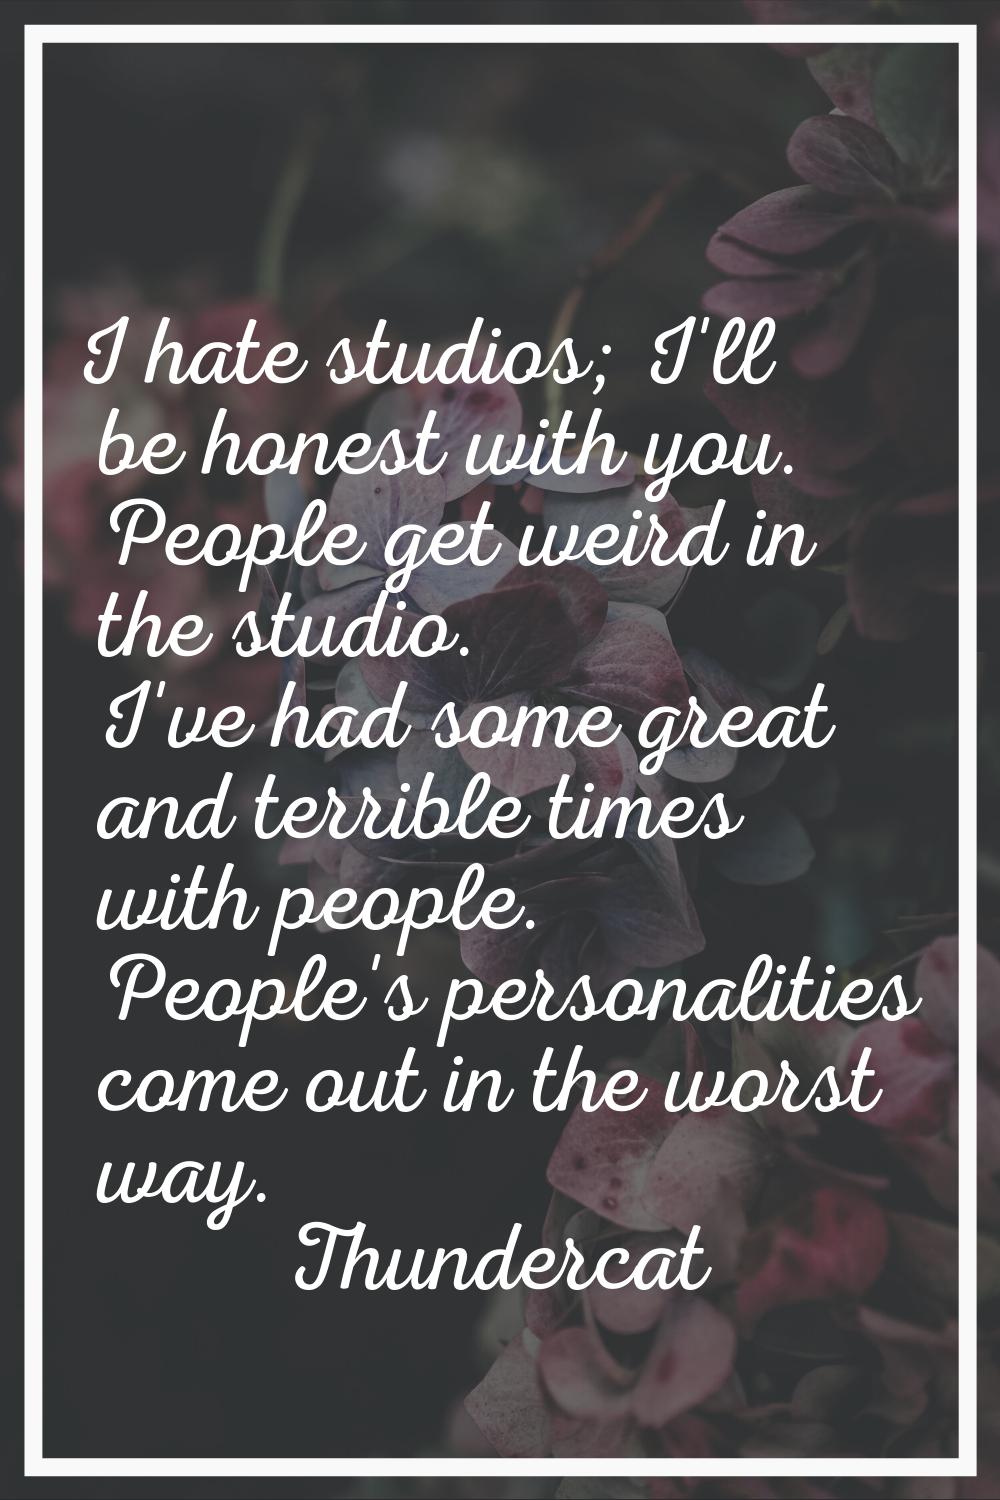 I hate studios; I'll be honest with you. People get weird in the studio. I've had some great and te